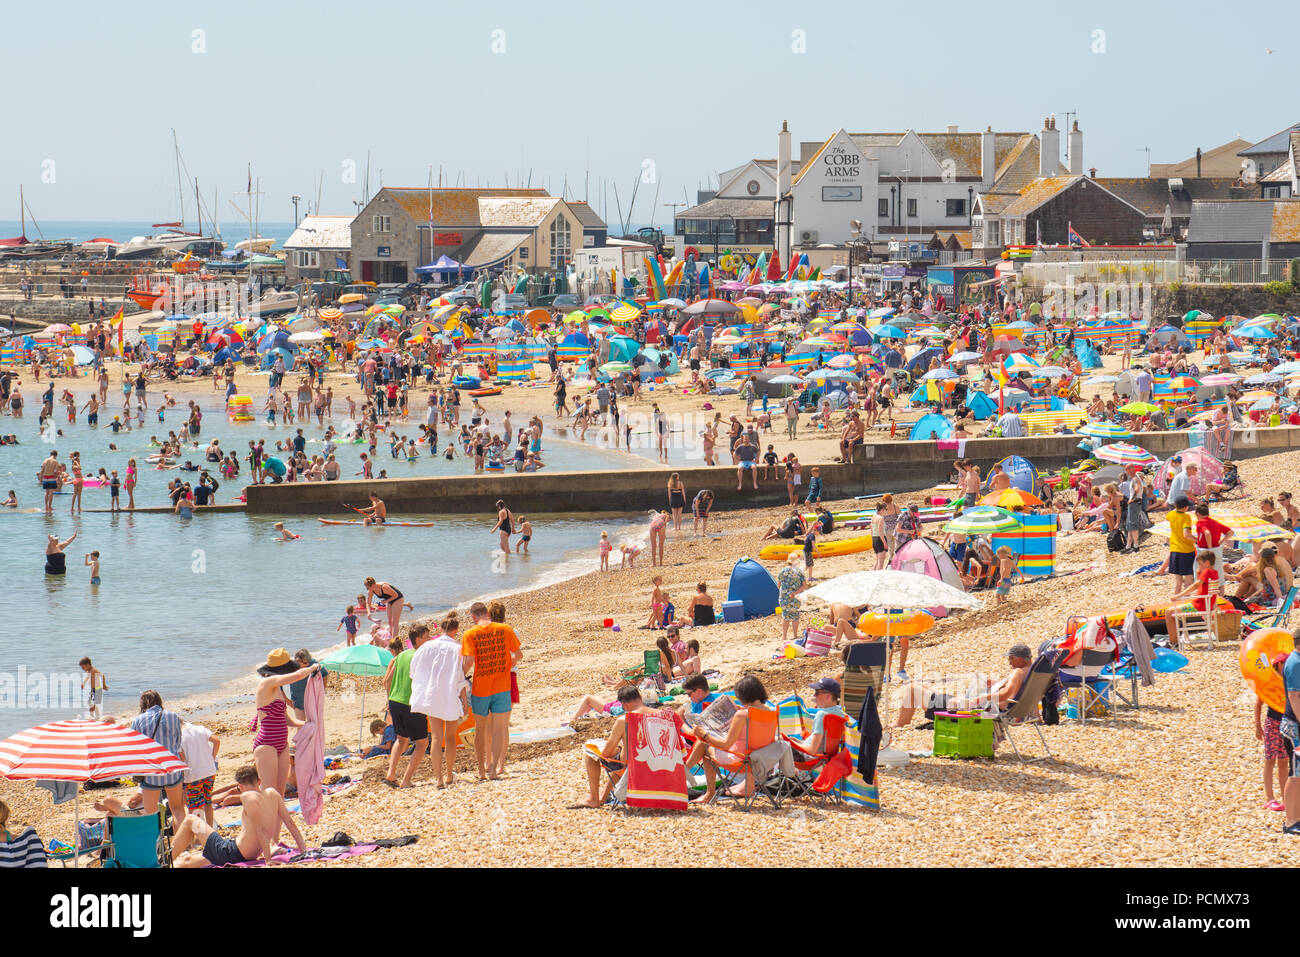 Lyme Regis, Dorset, UK. 3rd August 2018.  UK Weather: Scorching hot sunshine and blue sky in Lyme Regis.  Holidaymakers and sunseekers flock to the packed beach at the seaside resort of Lyme Regis this afternoon as temperatures soar on what is set to be the hottest day on record. Credit: Celia McMahon/Alamy Live News Stock Photo